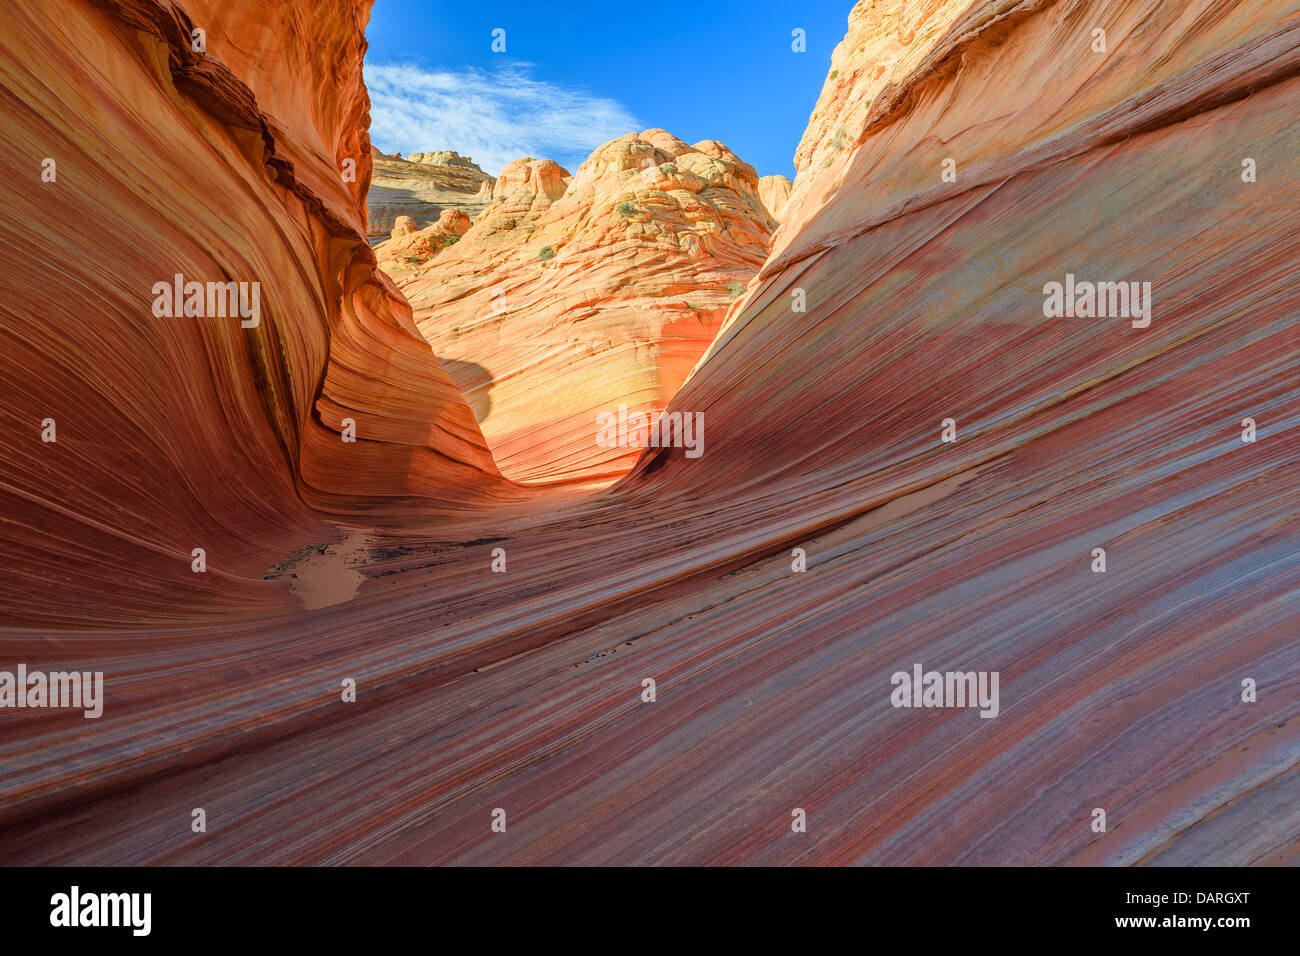 Rock formations in the North Coyote Buttes, part of the Vermilion Cliffs National Monument. This area is also known as The Wave. Stock Photo